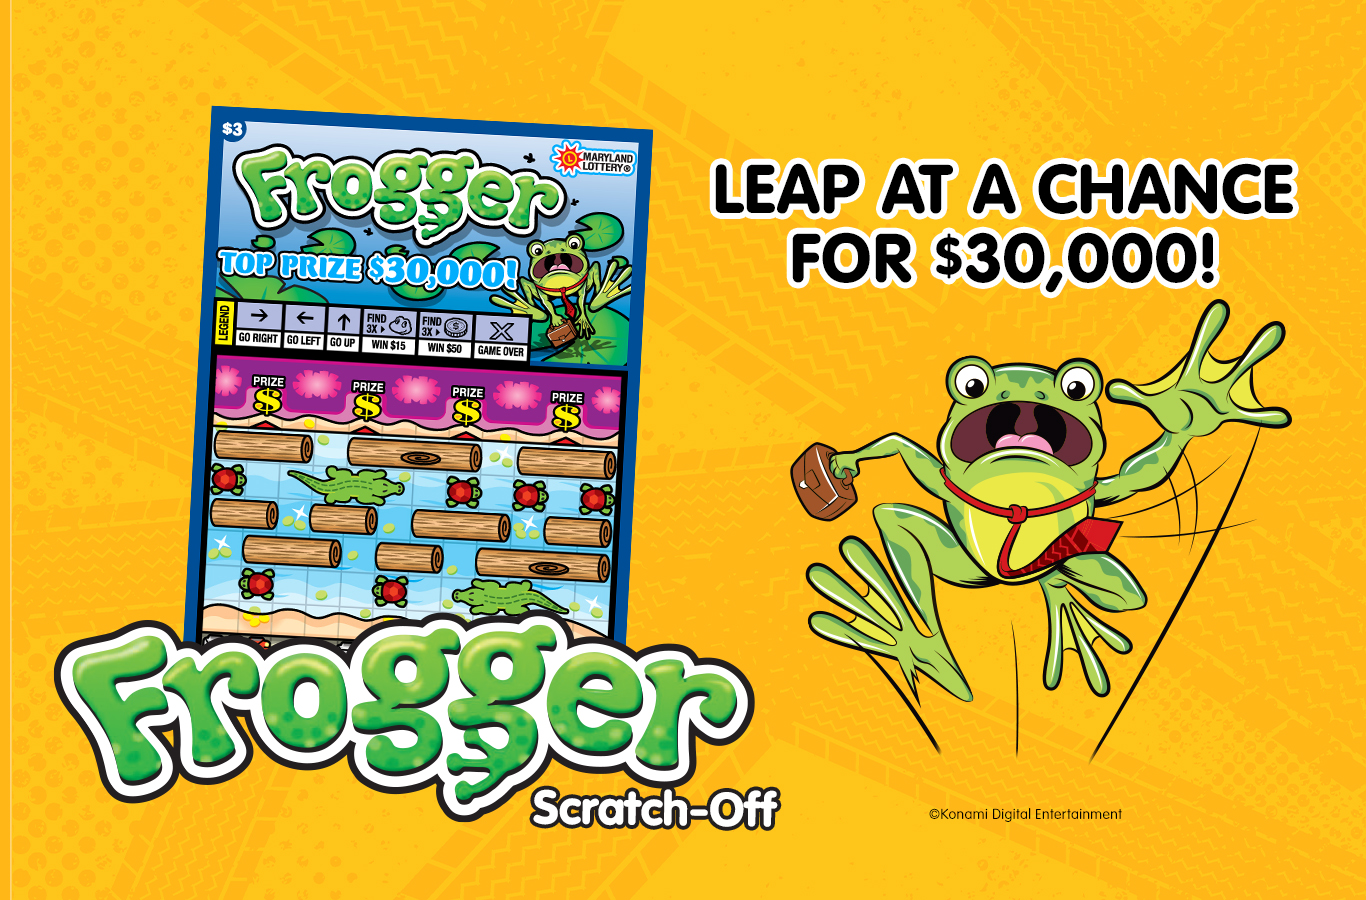 Get the fun of the classic arcade game in a new scratch-off. You could win up to $30,000 instantly!